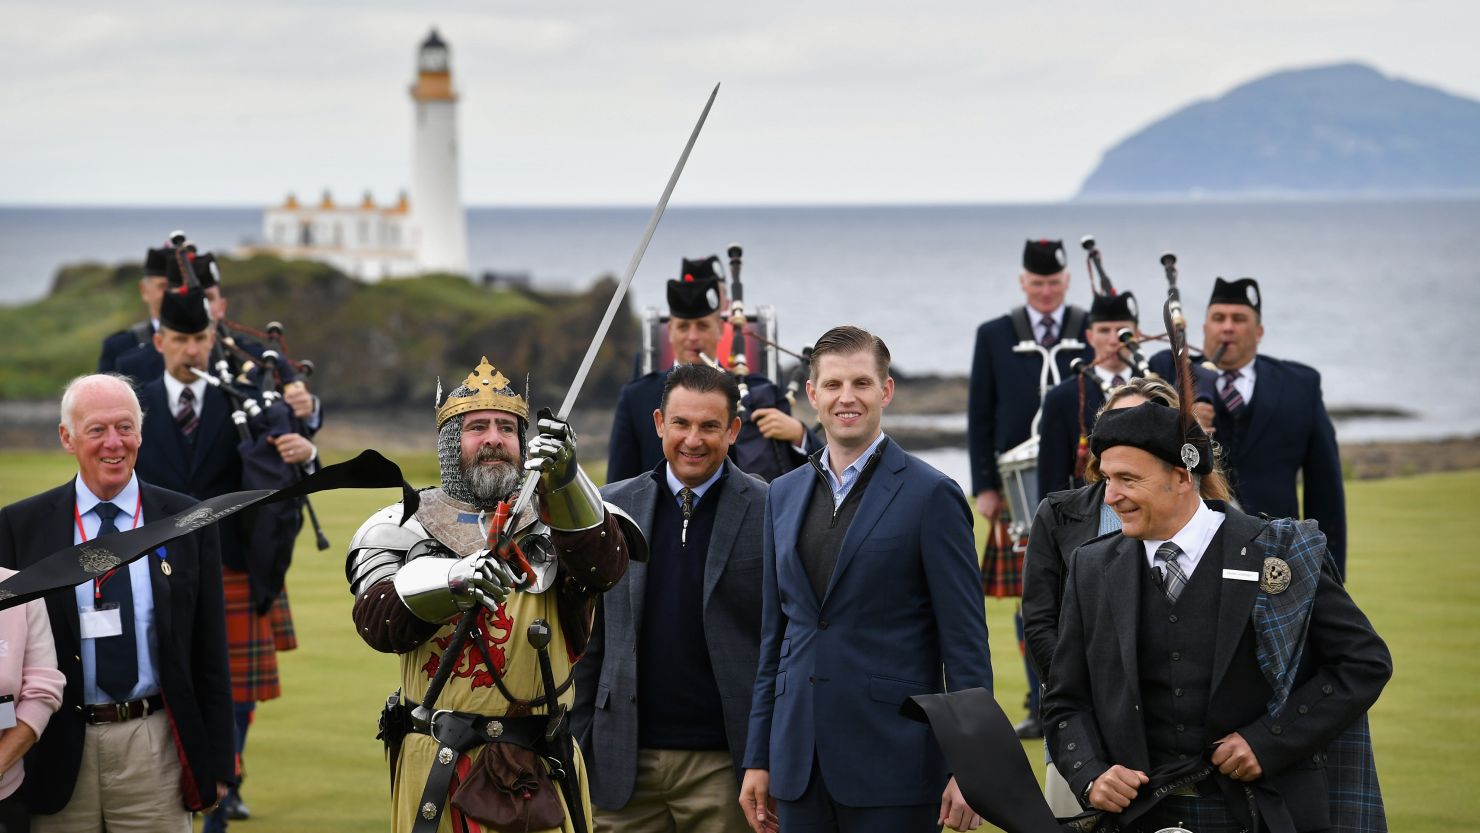 Eric Trump and his wife Lara (hidden) attend the ceremonial ribbon cutting of the "King Robert the Bruce" course at Trump Turnberry.